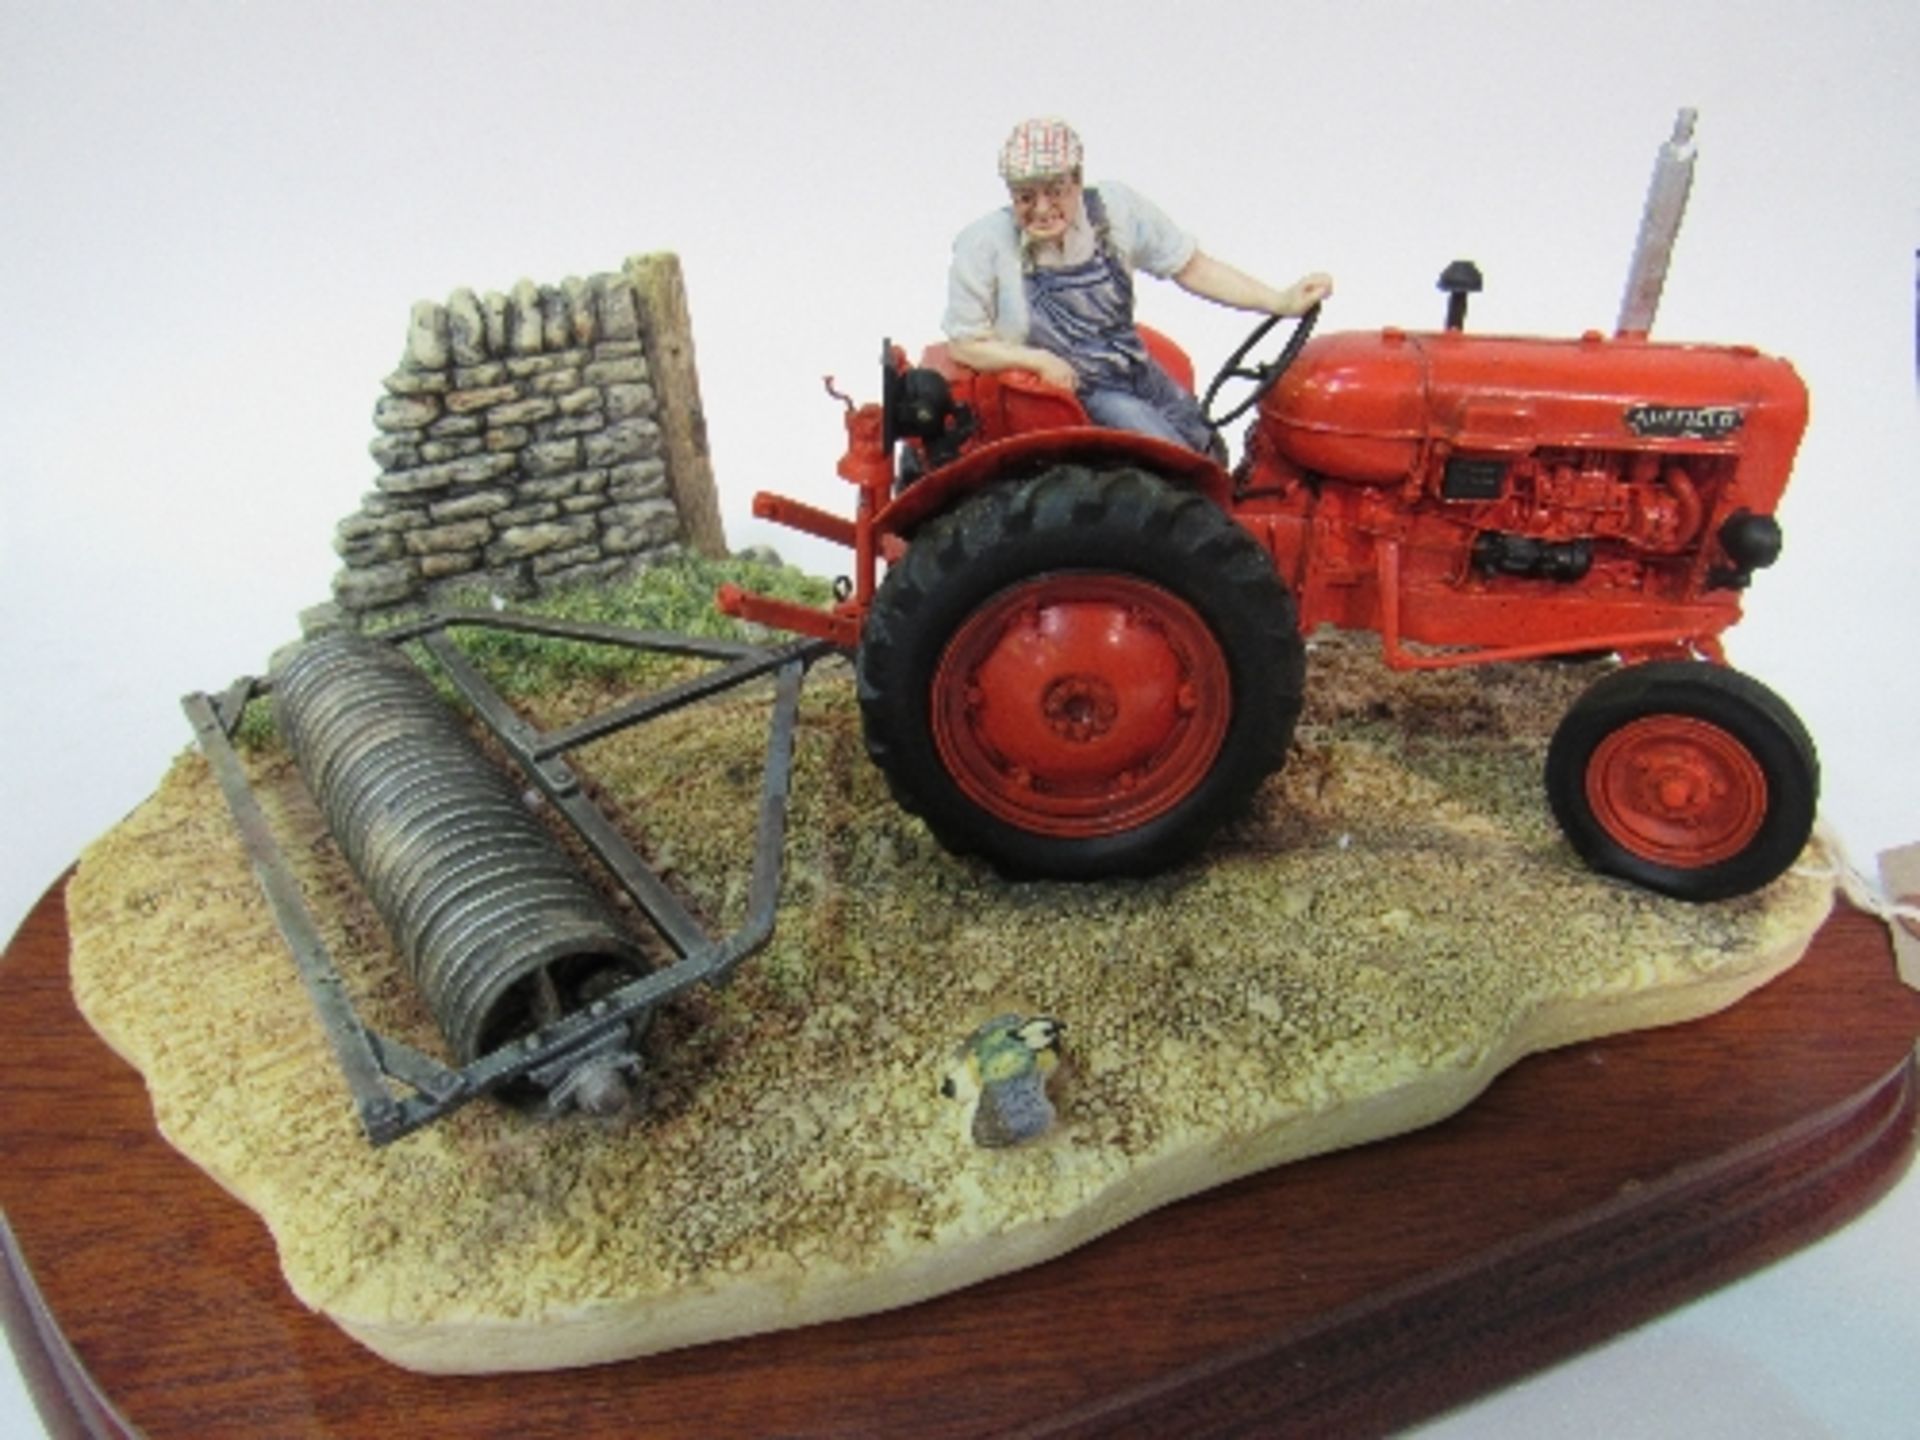 Border Fine Arts 'Turning with Care' Nuffield Tractor limited edition 1277 of 1750 Model B0094 - Image 5 of 5